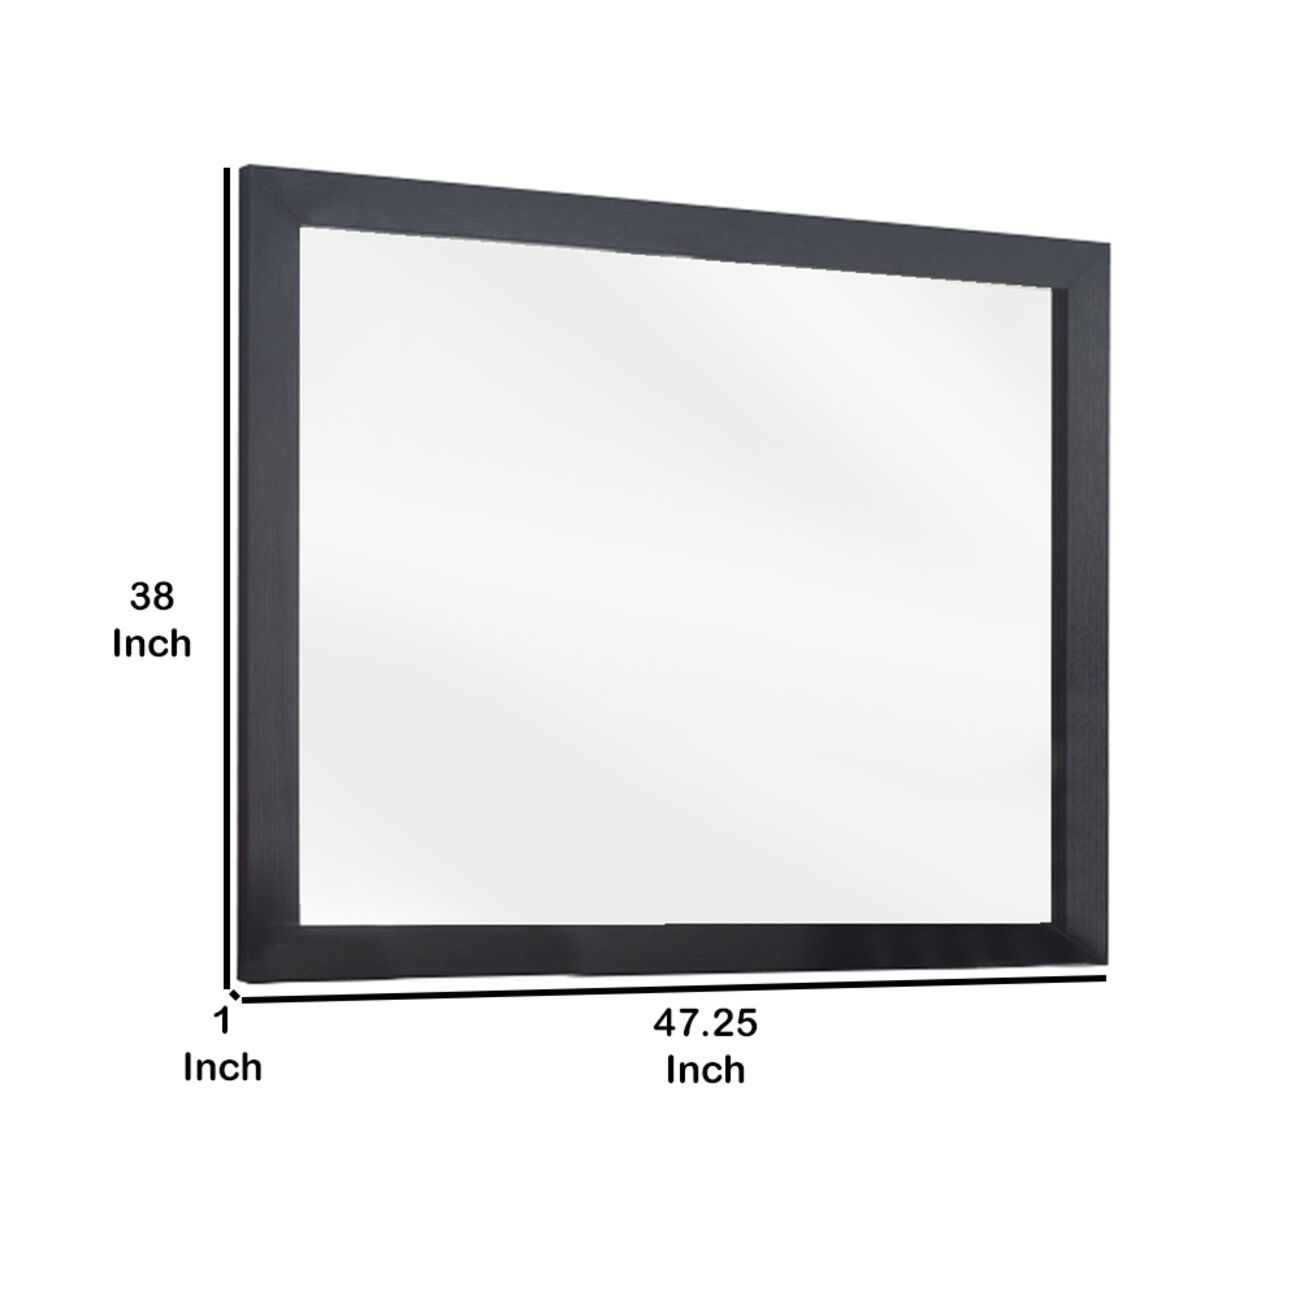 Transitional Style Rectangular Mirror with Wooden Frame, Black and Silver